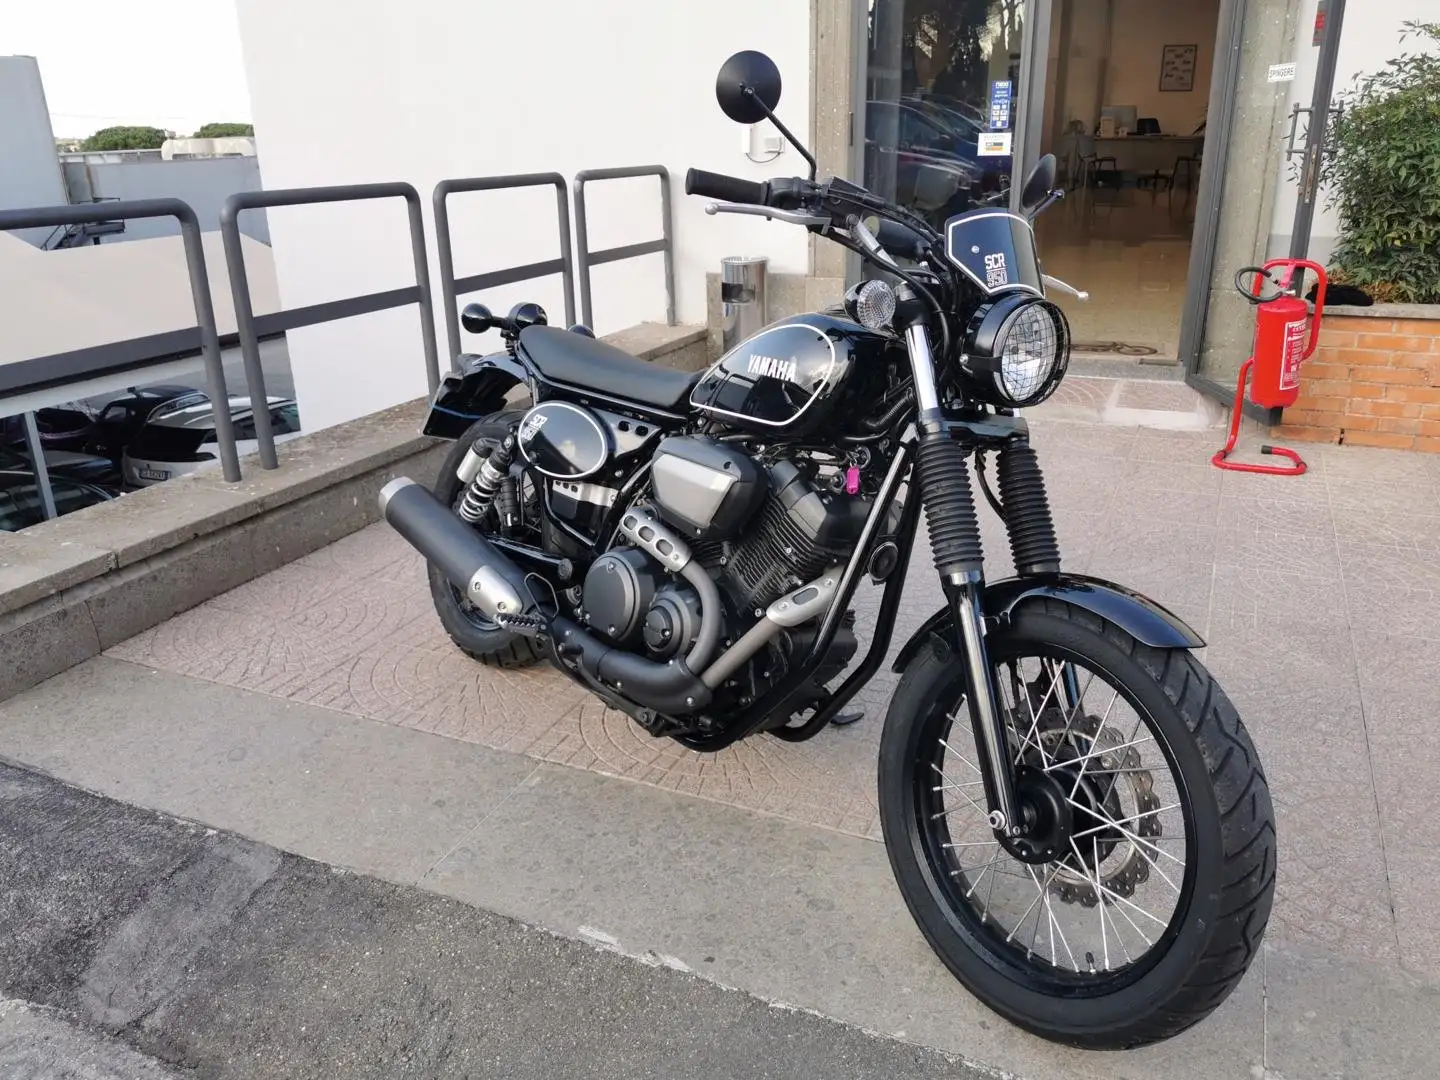 Yamaha SCR 950 * E4 * - ABS - RATE AUTO MOTO SCOOTER Schwarz - 2